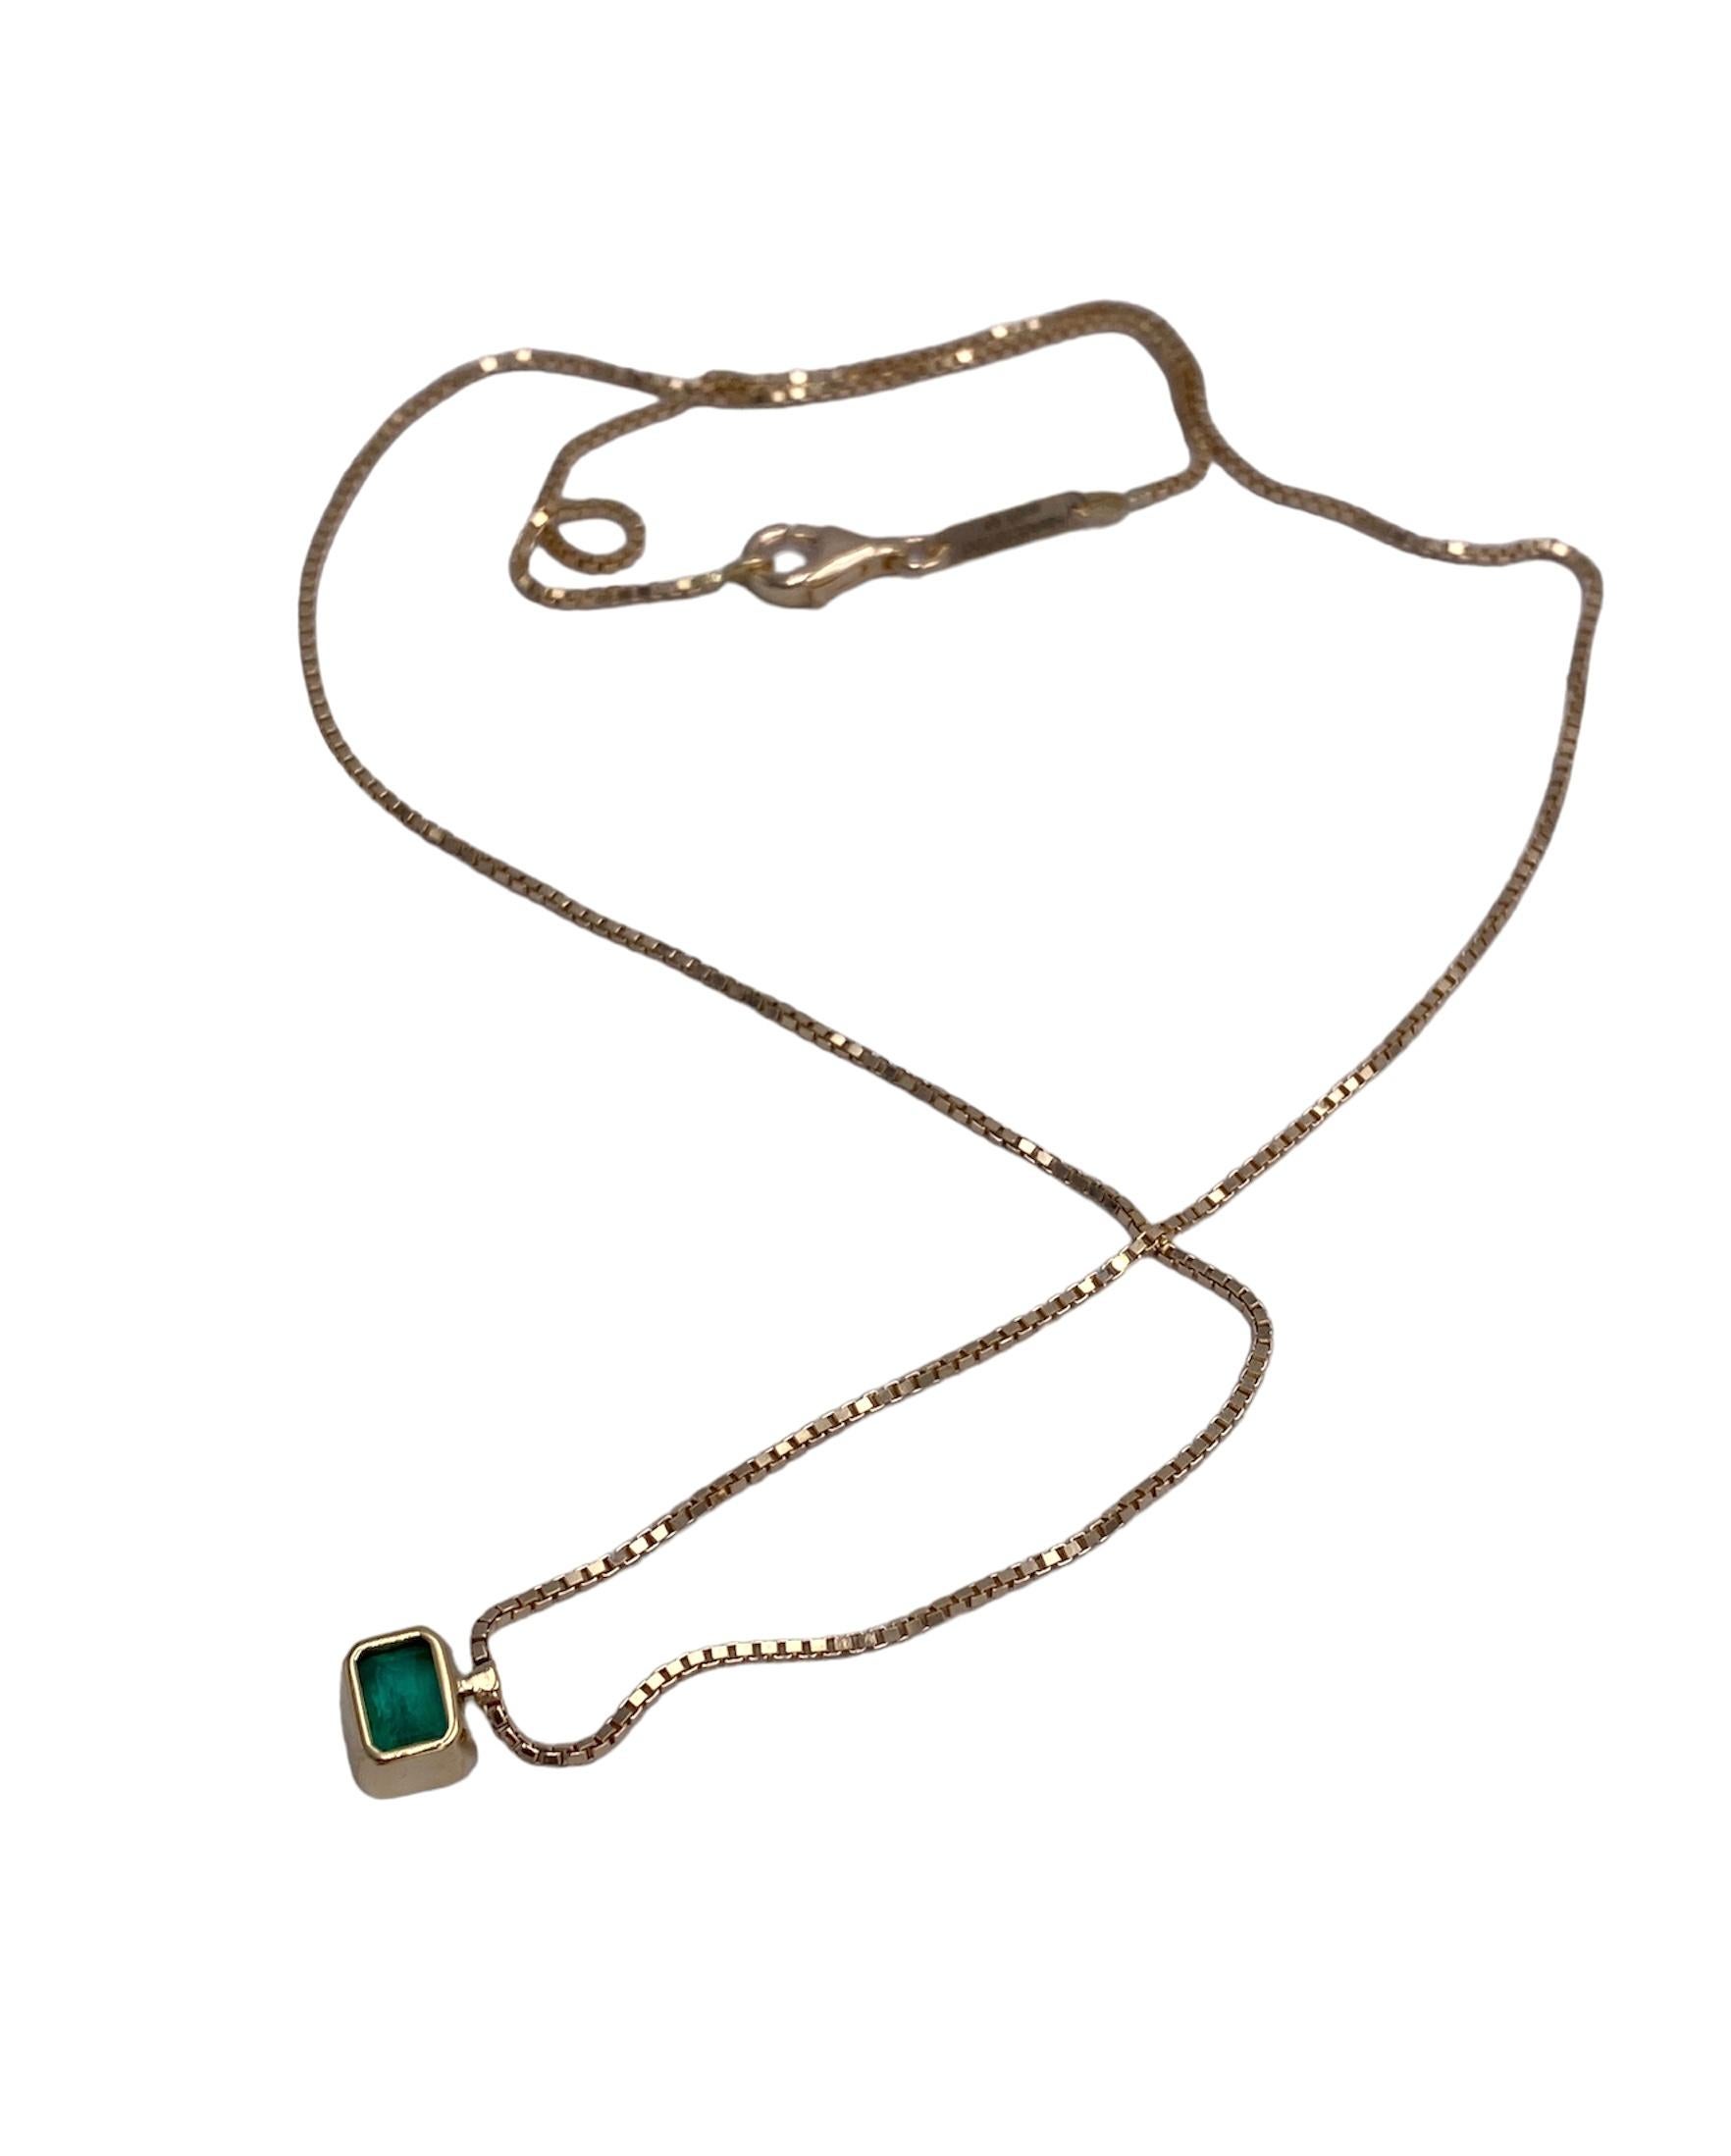 Rossella Ugolini Modern Emerald Man Necklace Crafted in Italy 18K Yellow Gold For Sale 3